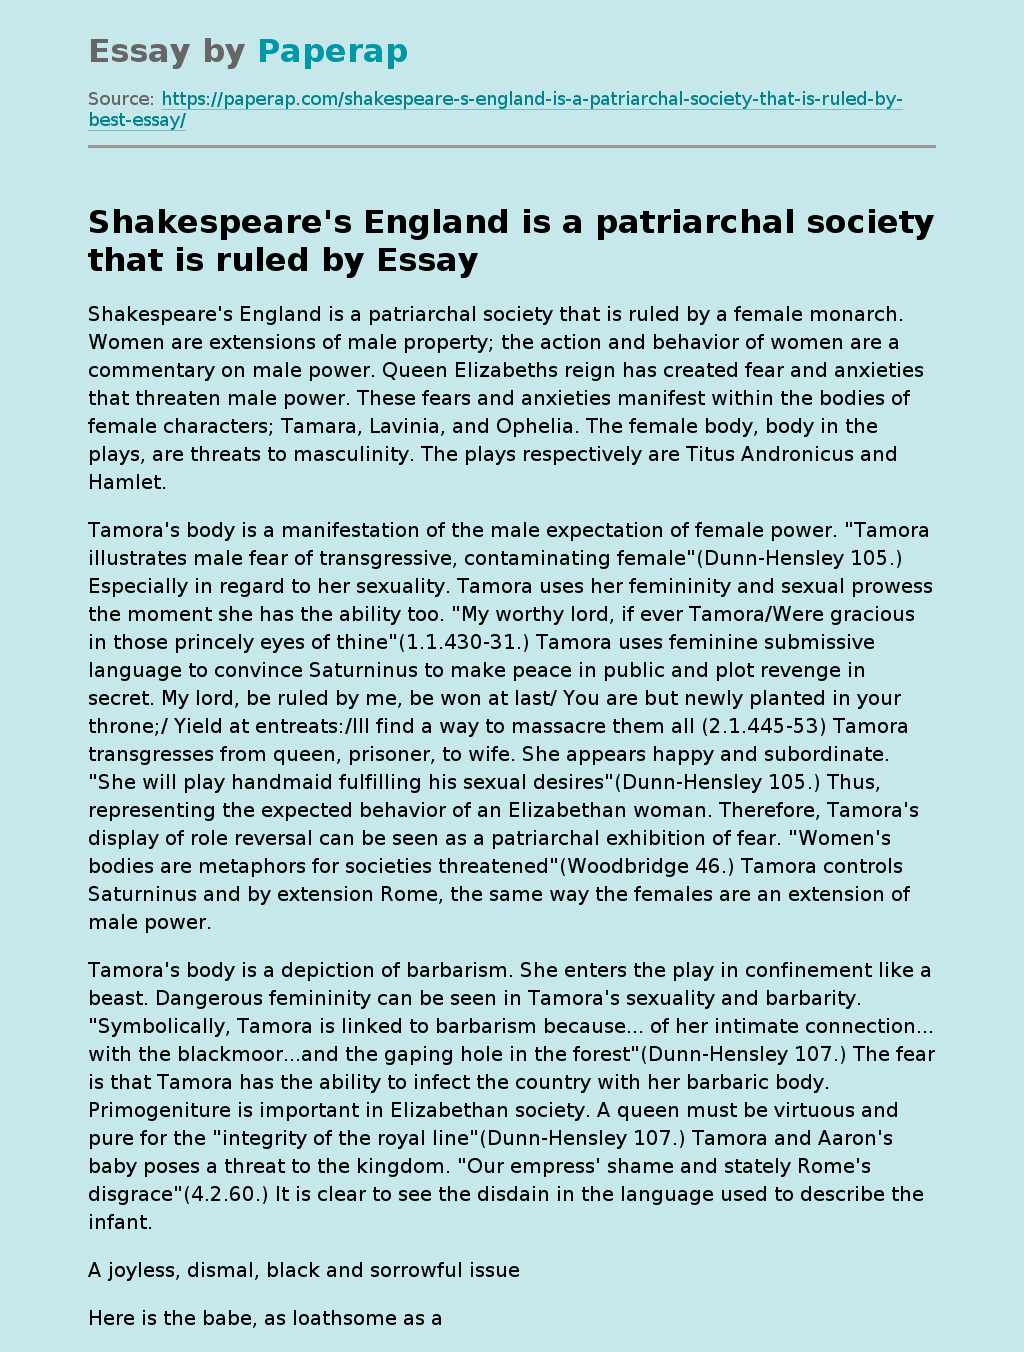 Shakespeare's England is a patriarchal society that is ruled by best